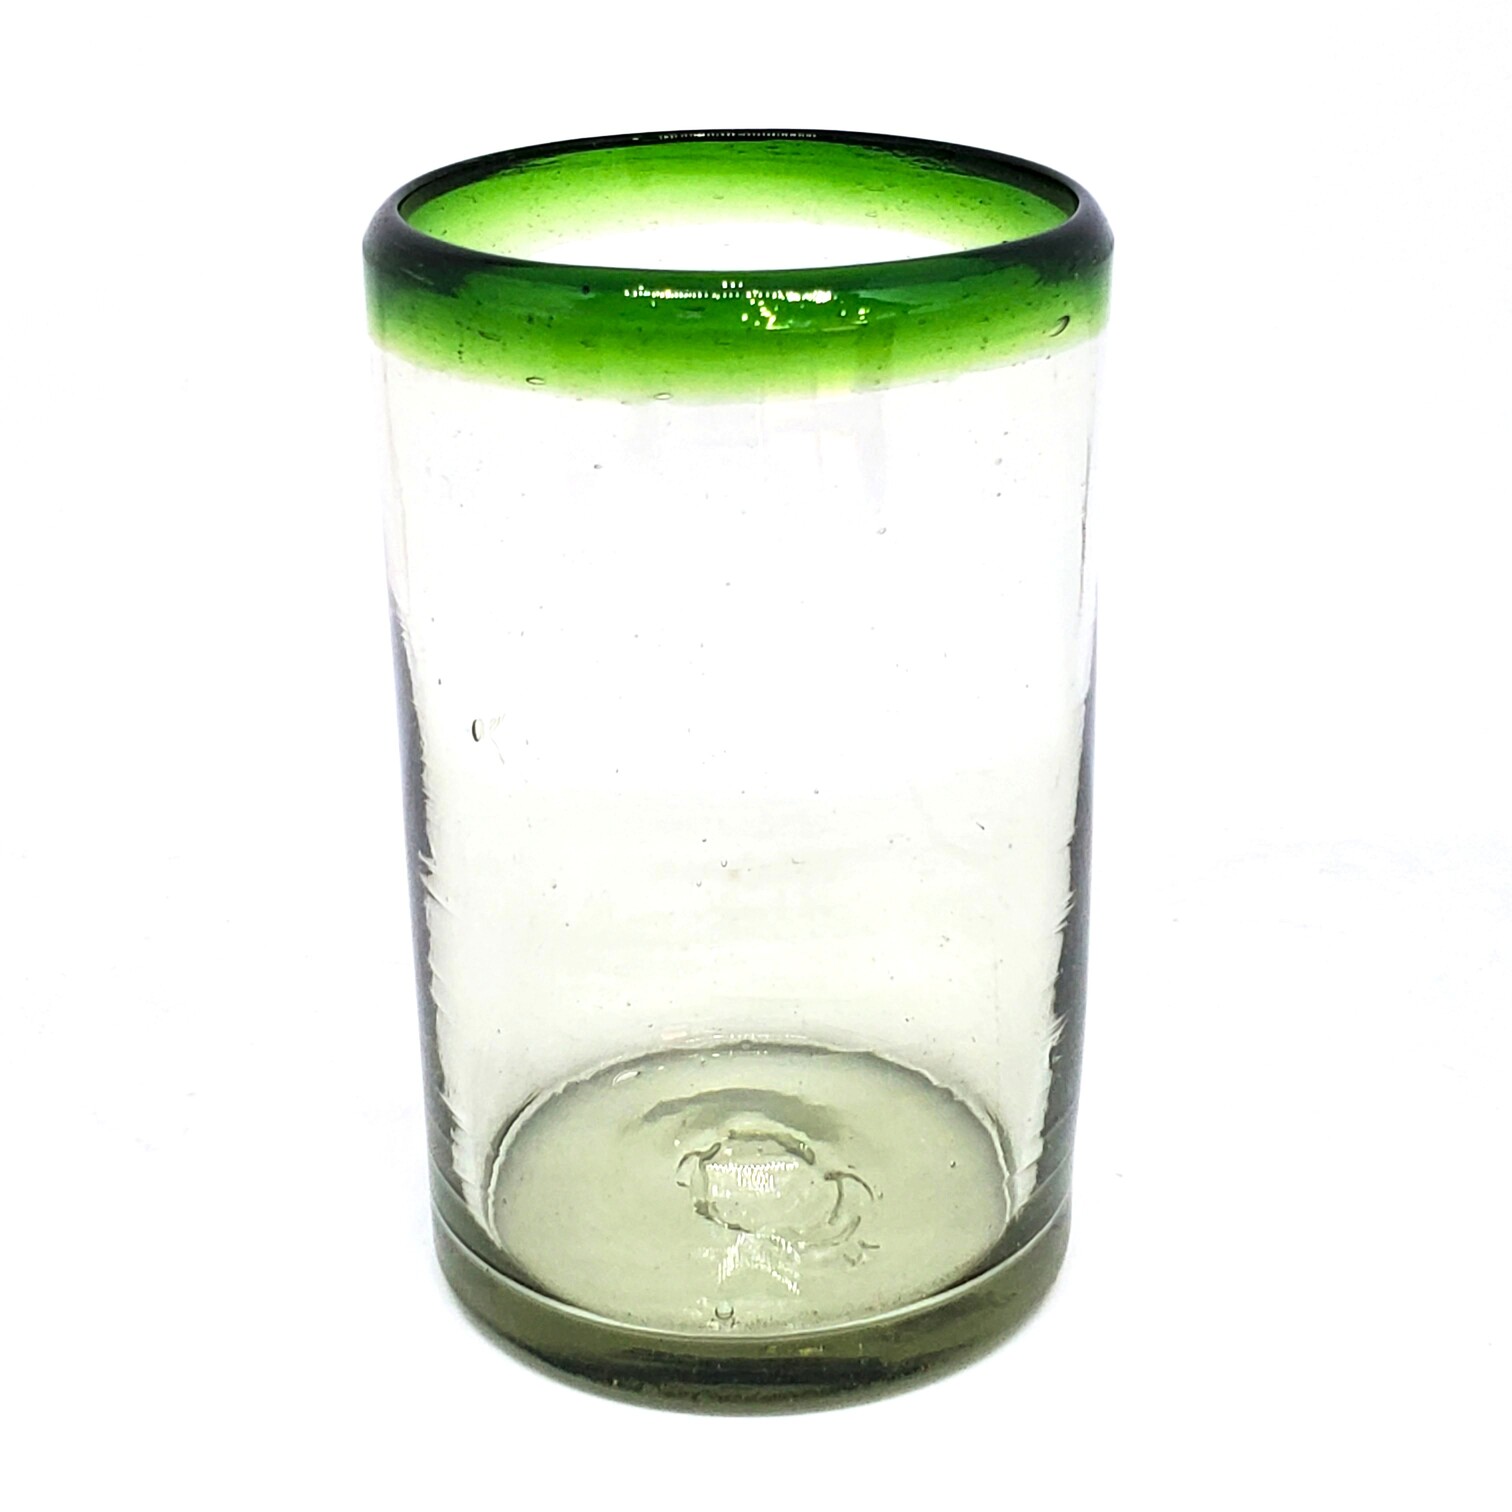 Wholesale Mexican Glasses / Emerald Green Rim 14 oz Drinking Glasses  / These handcrafted glasses deliver a classic touch to your favorite drink.